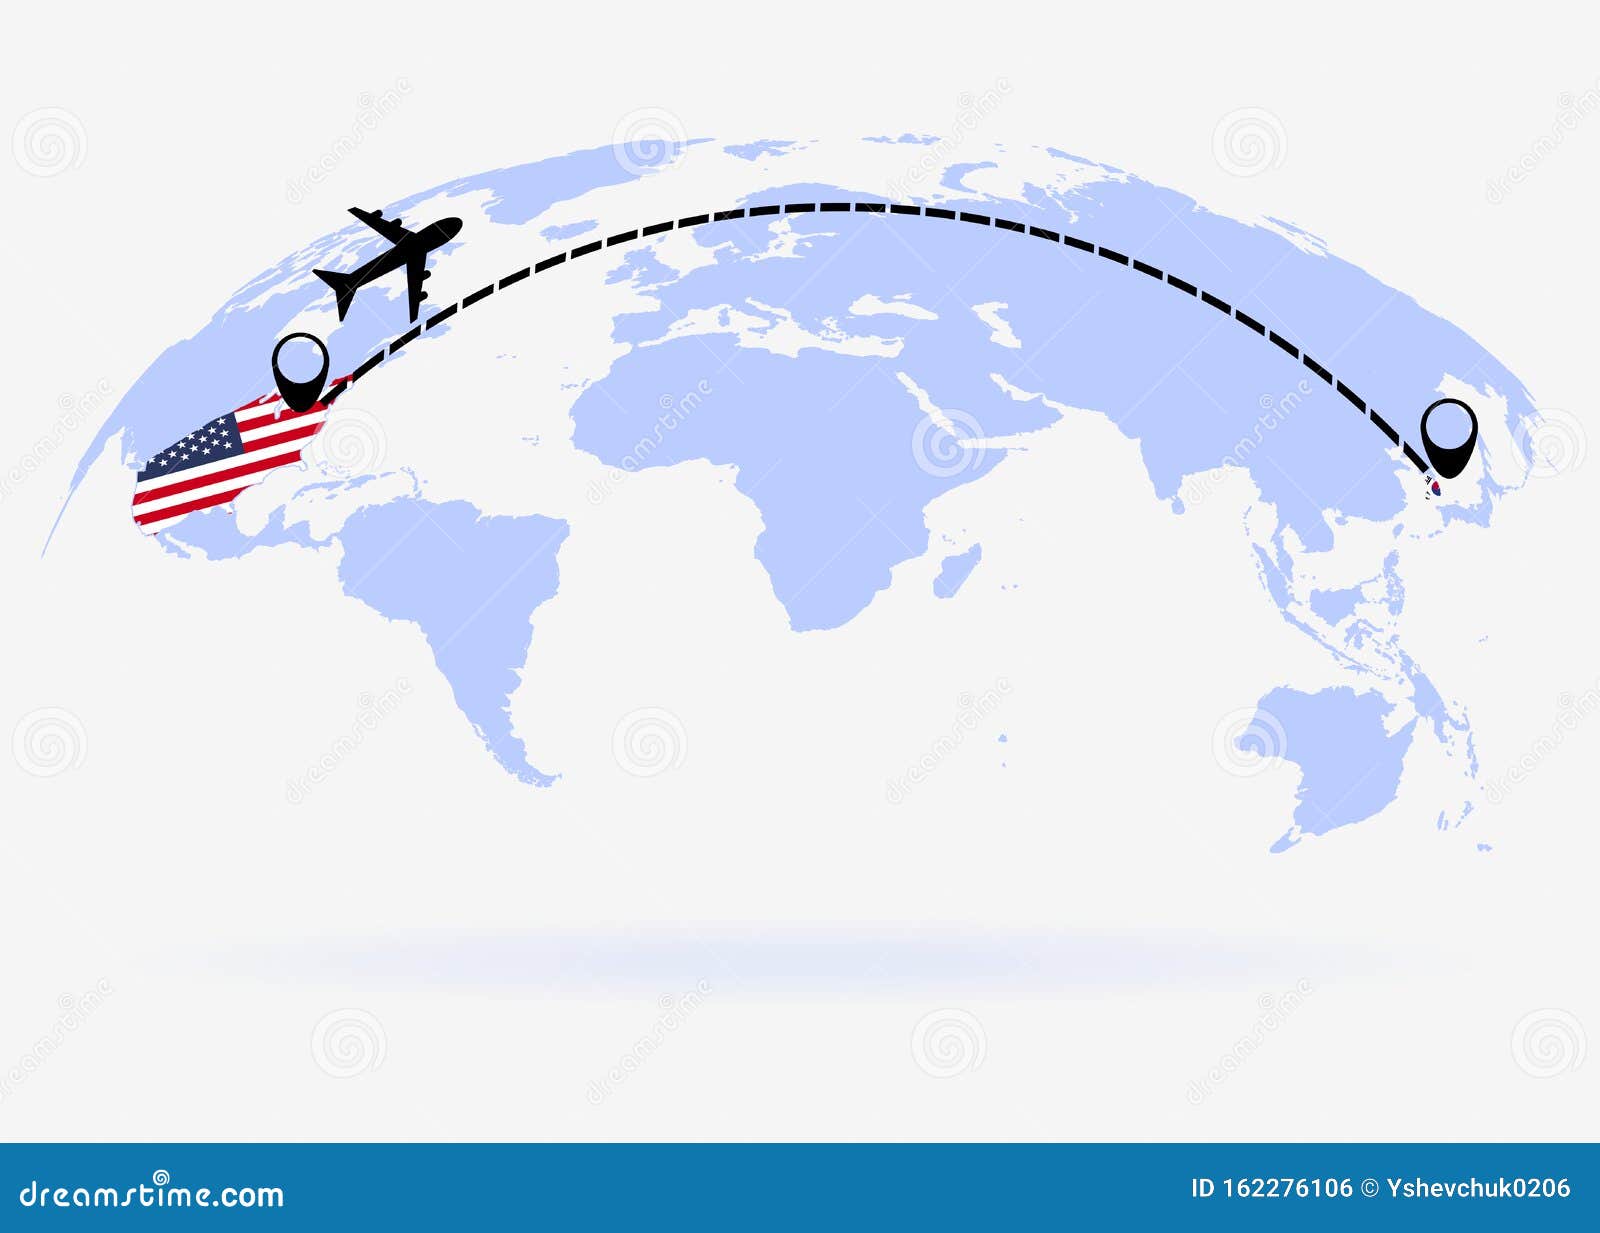 Flight from USA To South Korea World Arrives To South Korea. the World Map. Airplane Line Path Stock Vector - Illustration of point, korea: 162276106